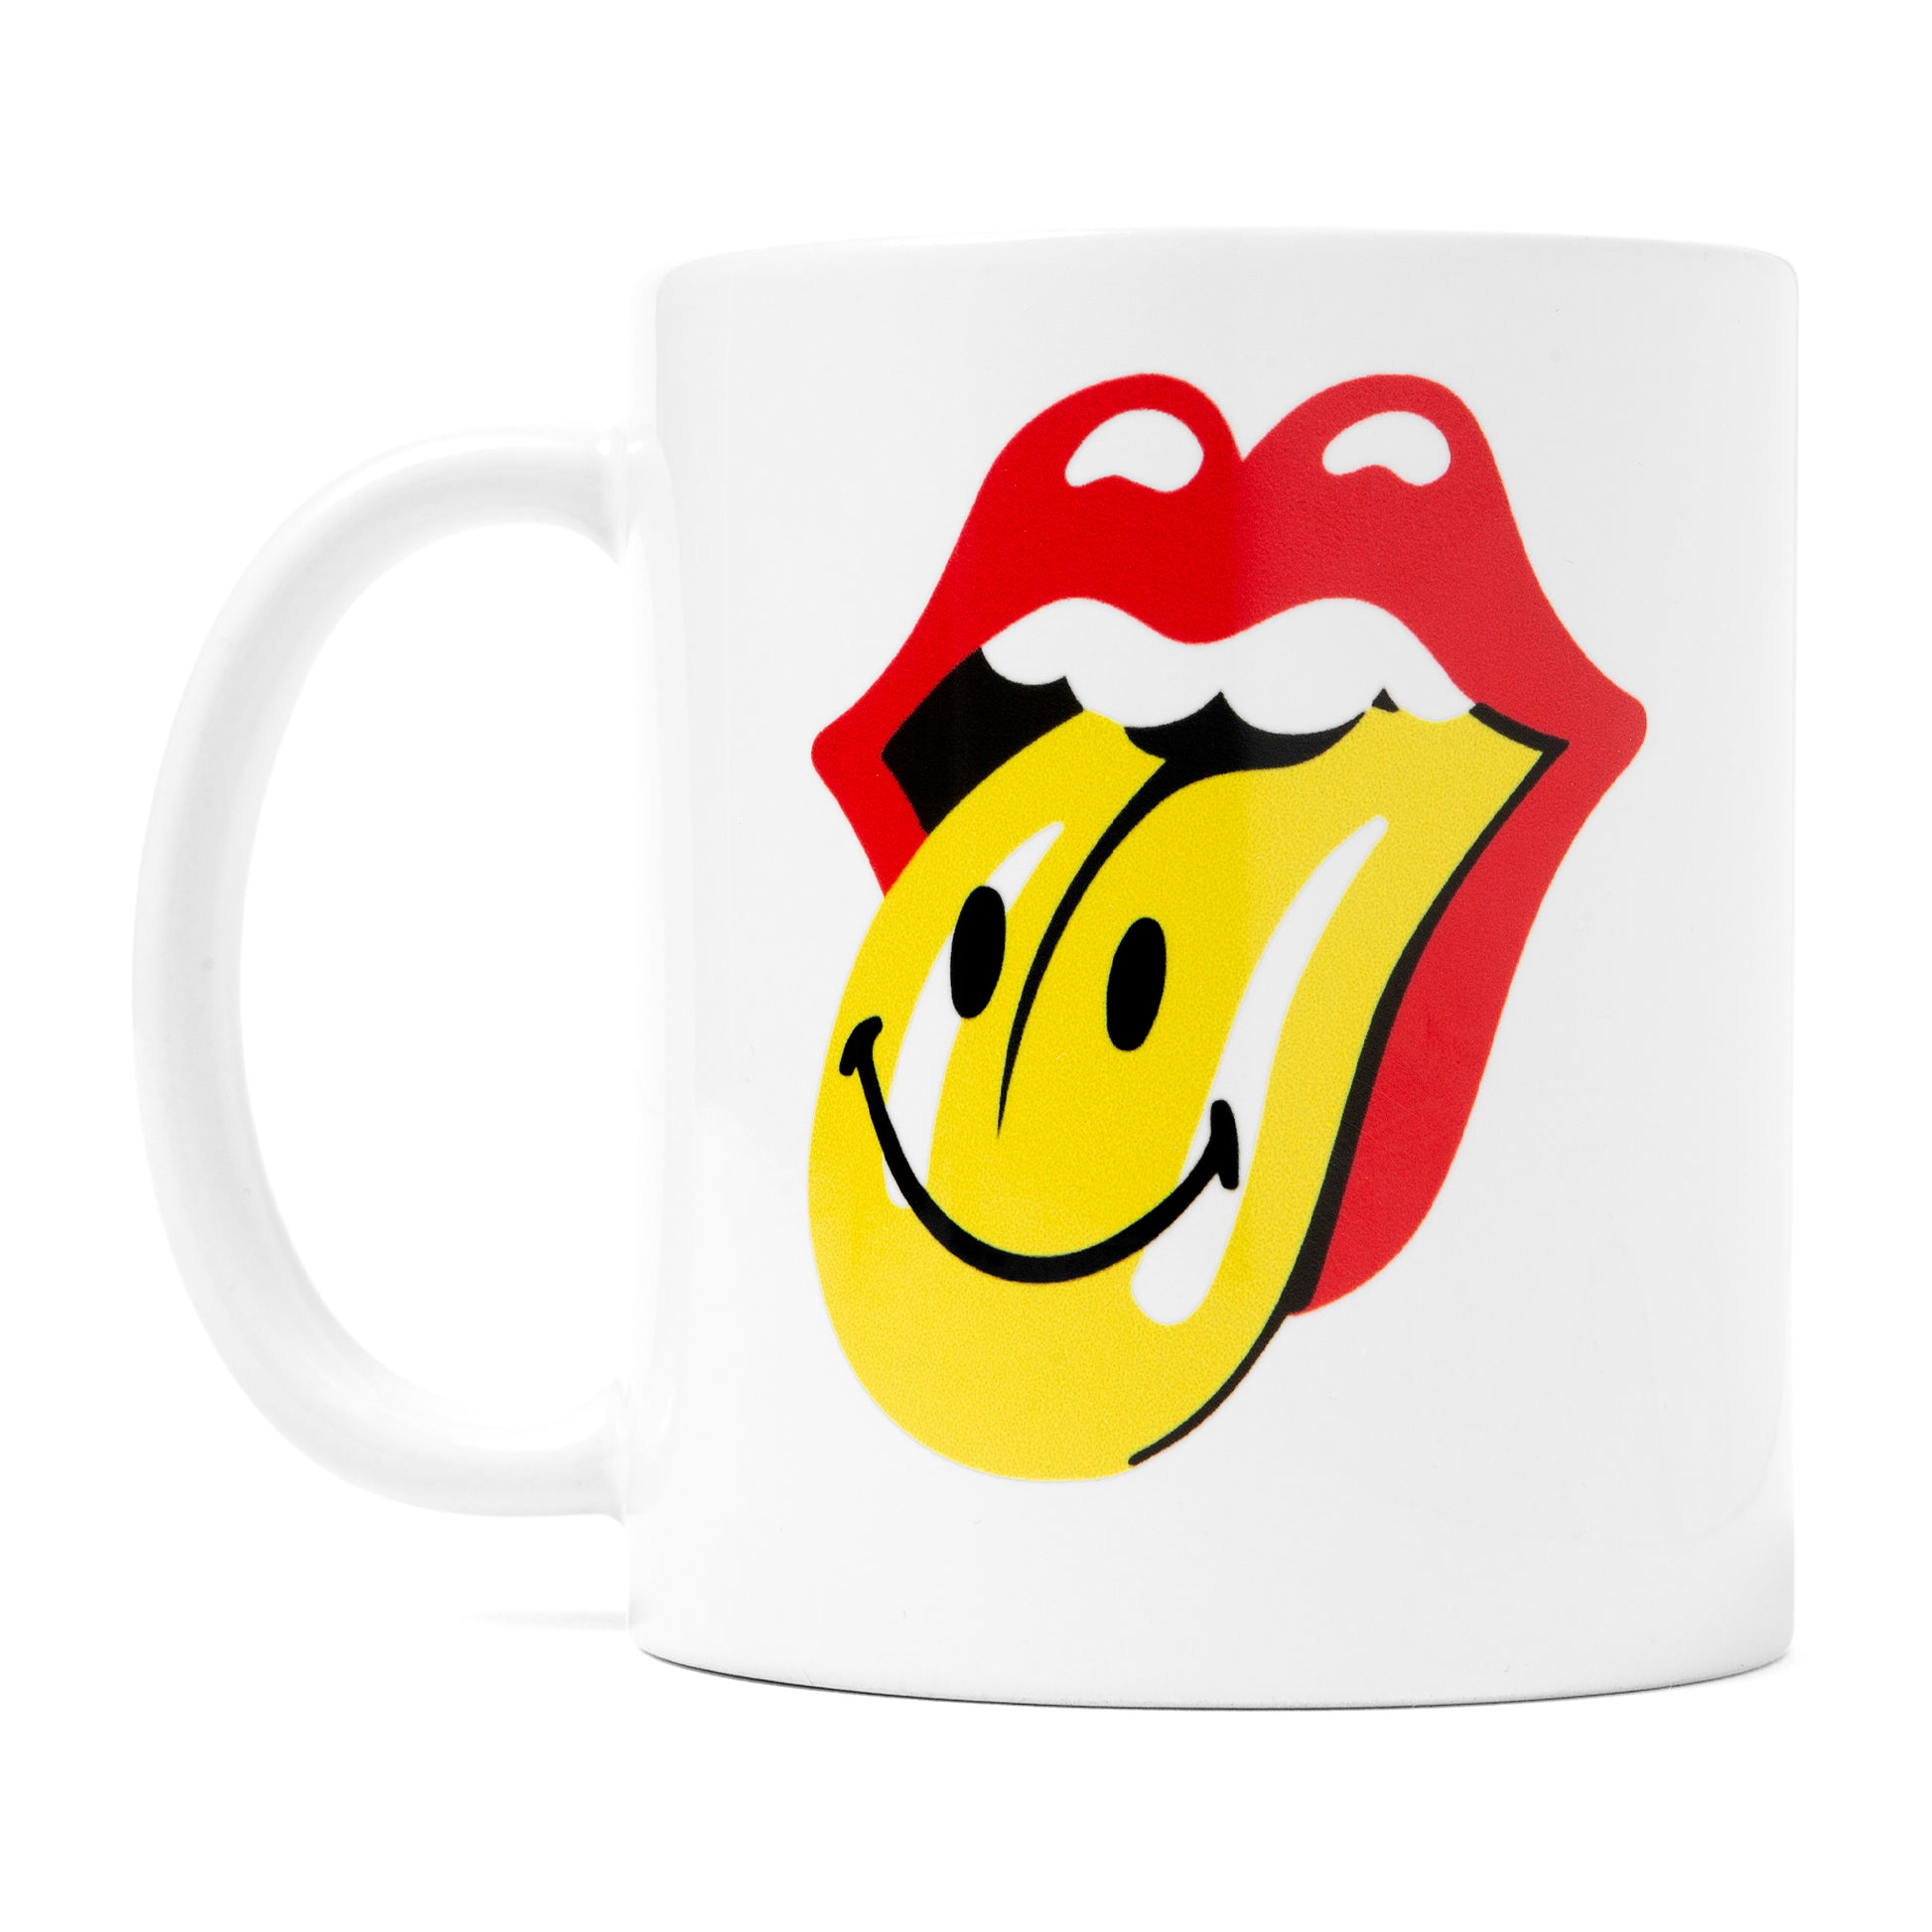 MARKET clothing brand SMILEY MARKET ROLLING STONES TONGUE MUG. Find more homegoods and graphic tees at MarketStudios.com. Formally Chinatown Market. 